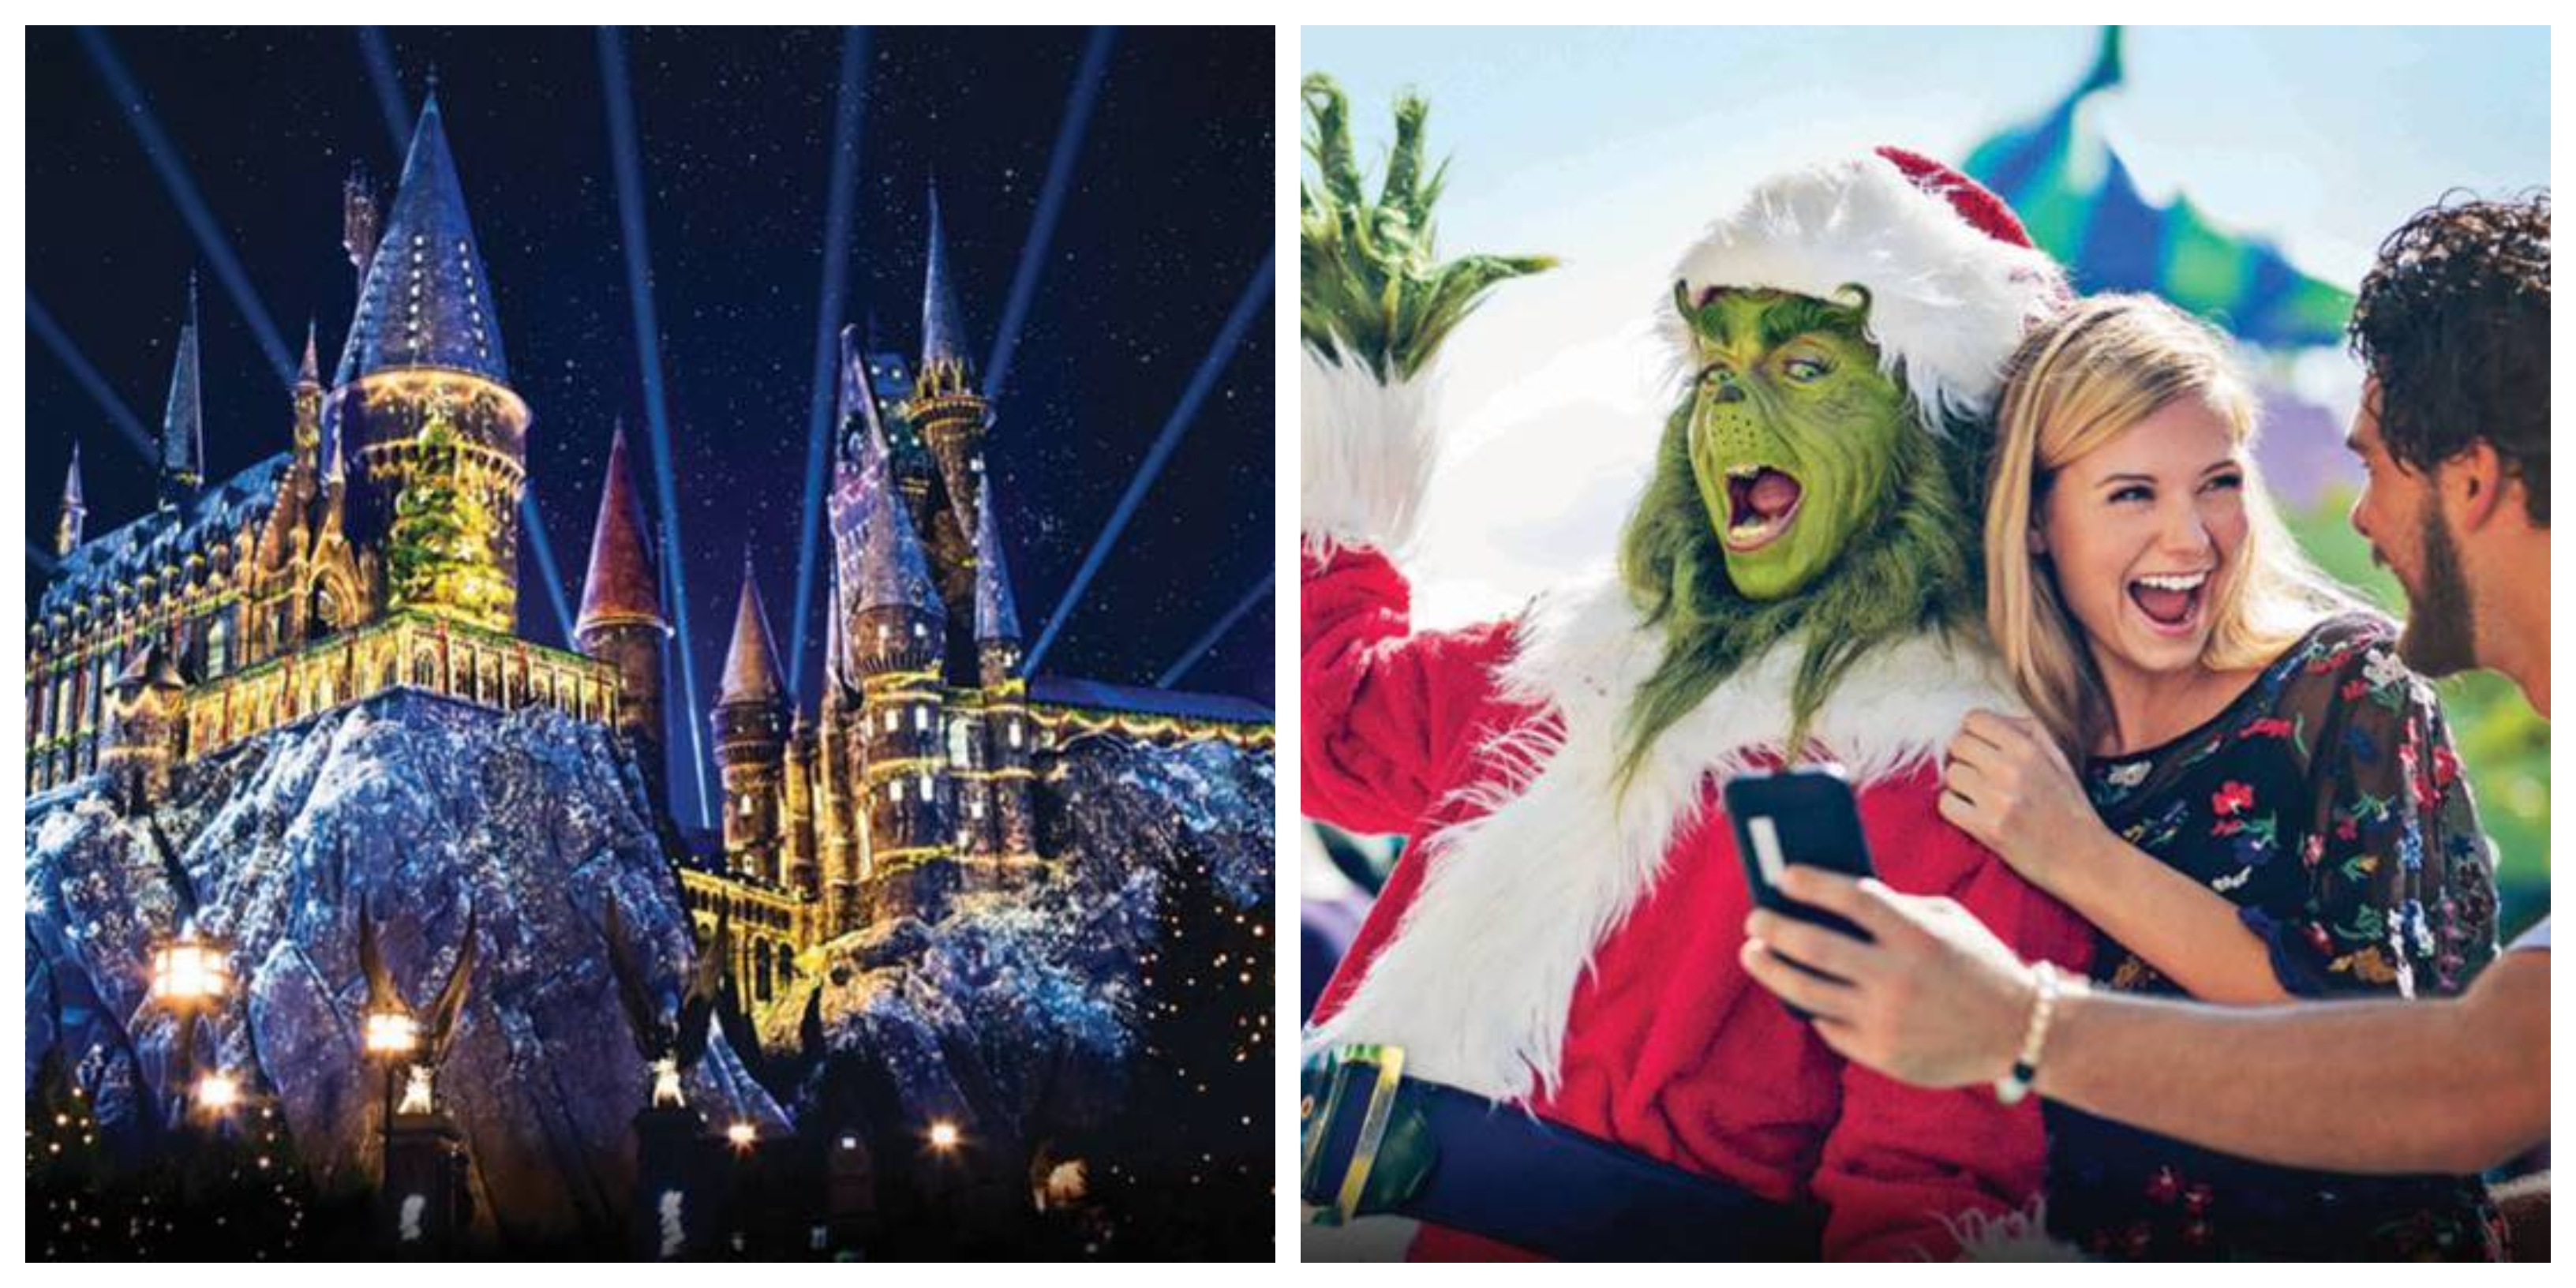 Universal Studios Hollywood Celebrates “Christmas in The Wizarding World of Harry Potter” and “Grinchmas,” Beginning Thursday, November 28 through December 29